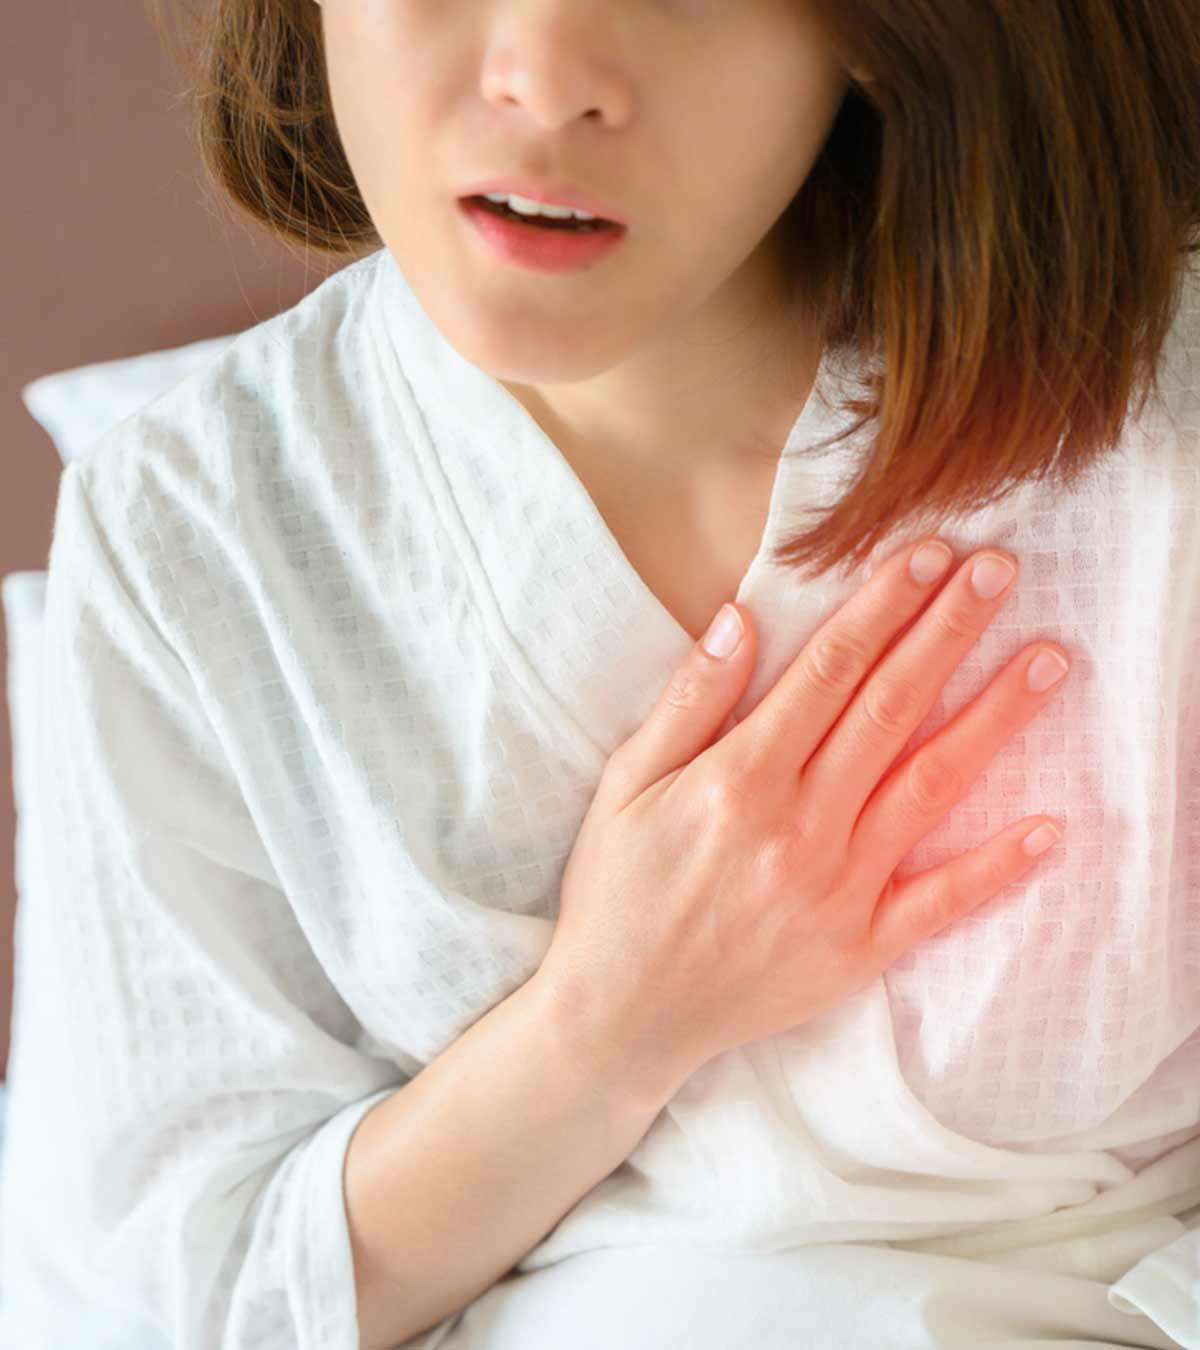 Heartburn In Teens: Causes, Symptoms, And Treatment